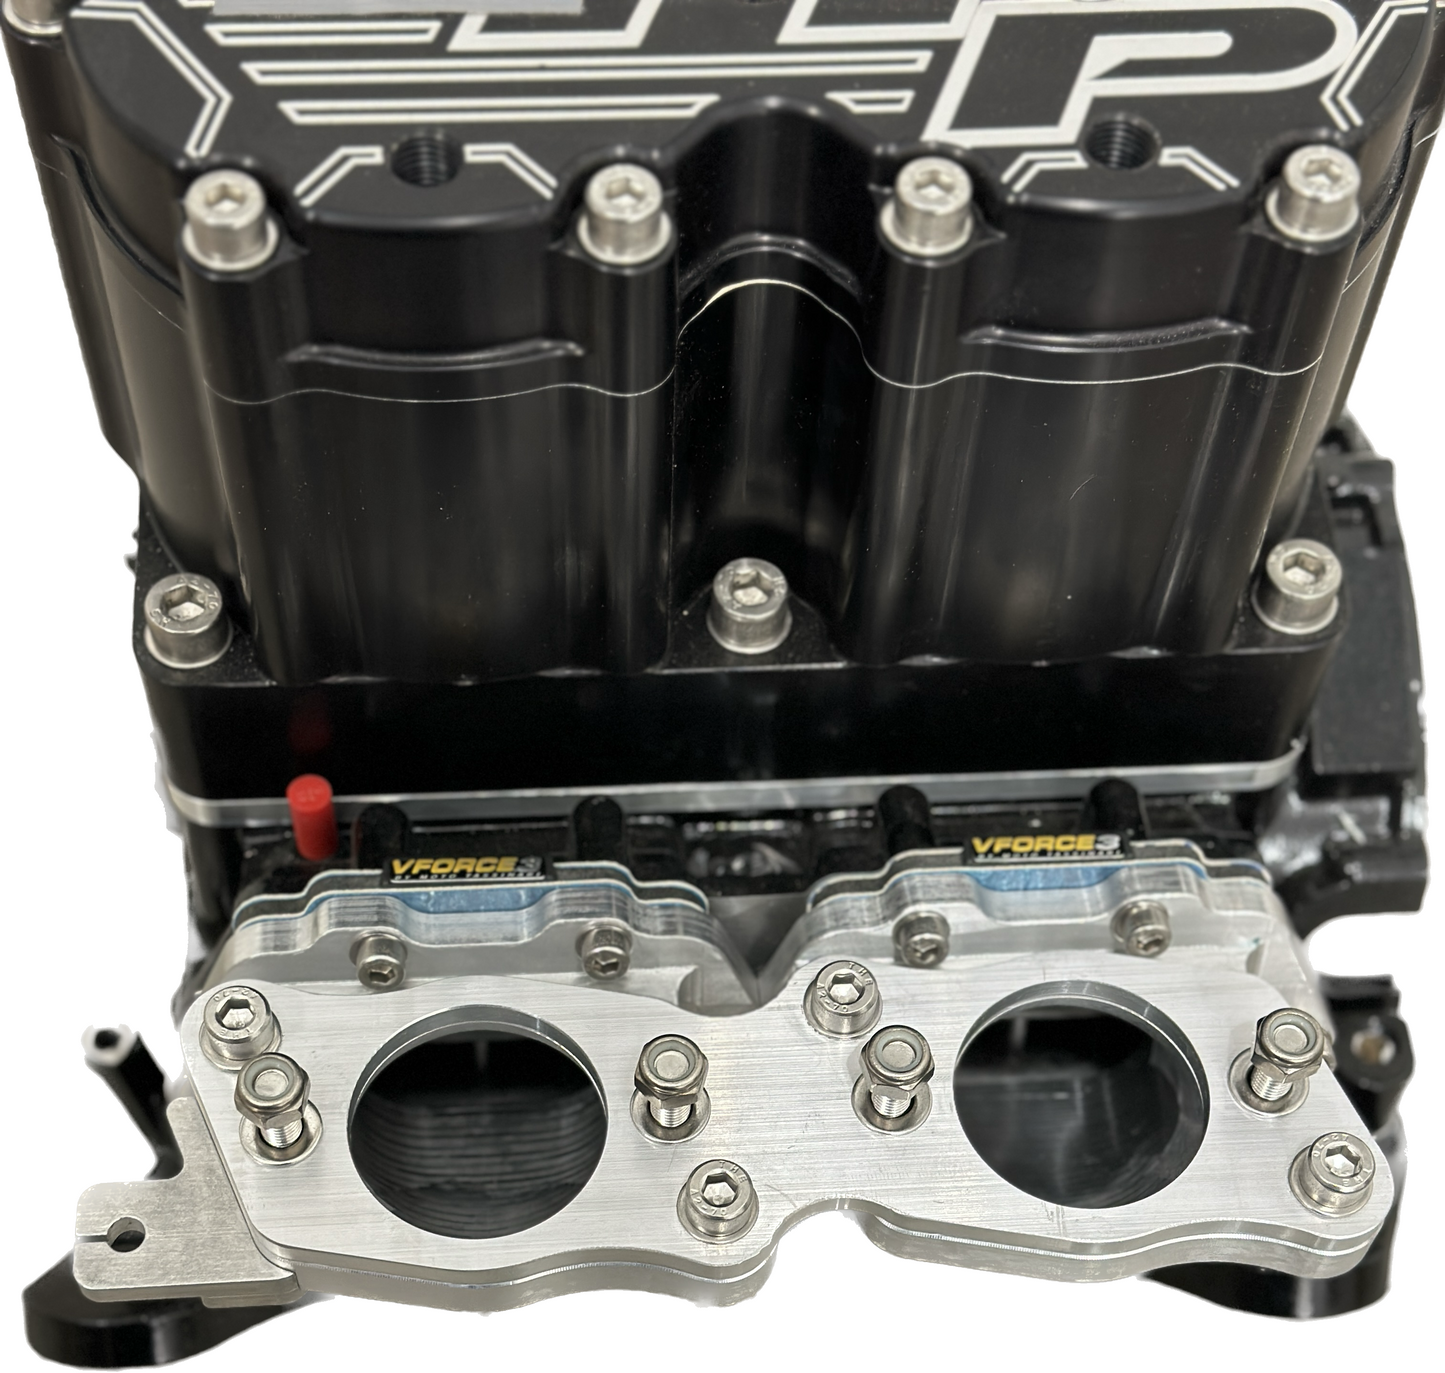 PHP Freestyle Intake Manifold for Yamaha based Engines using 62T or 64X Cases